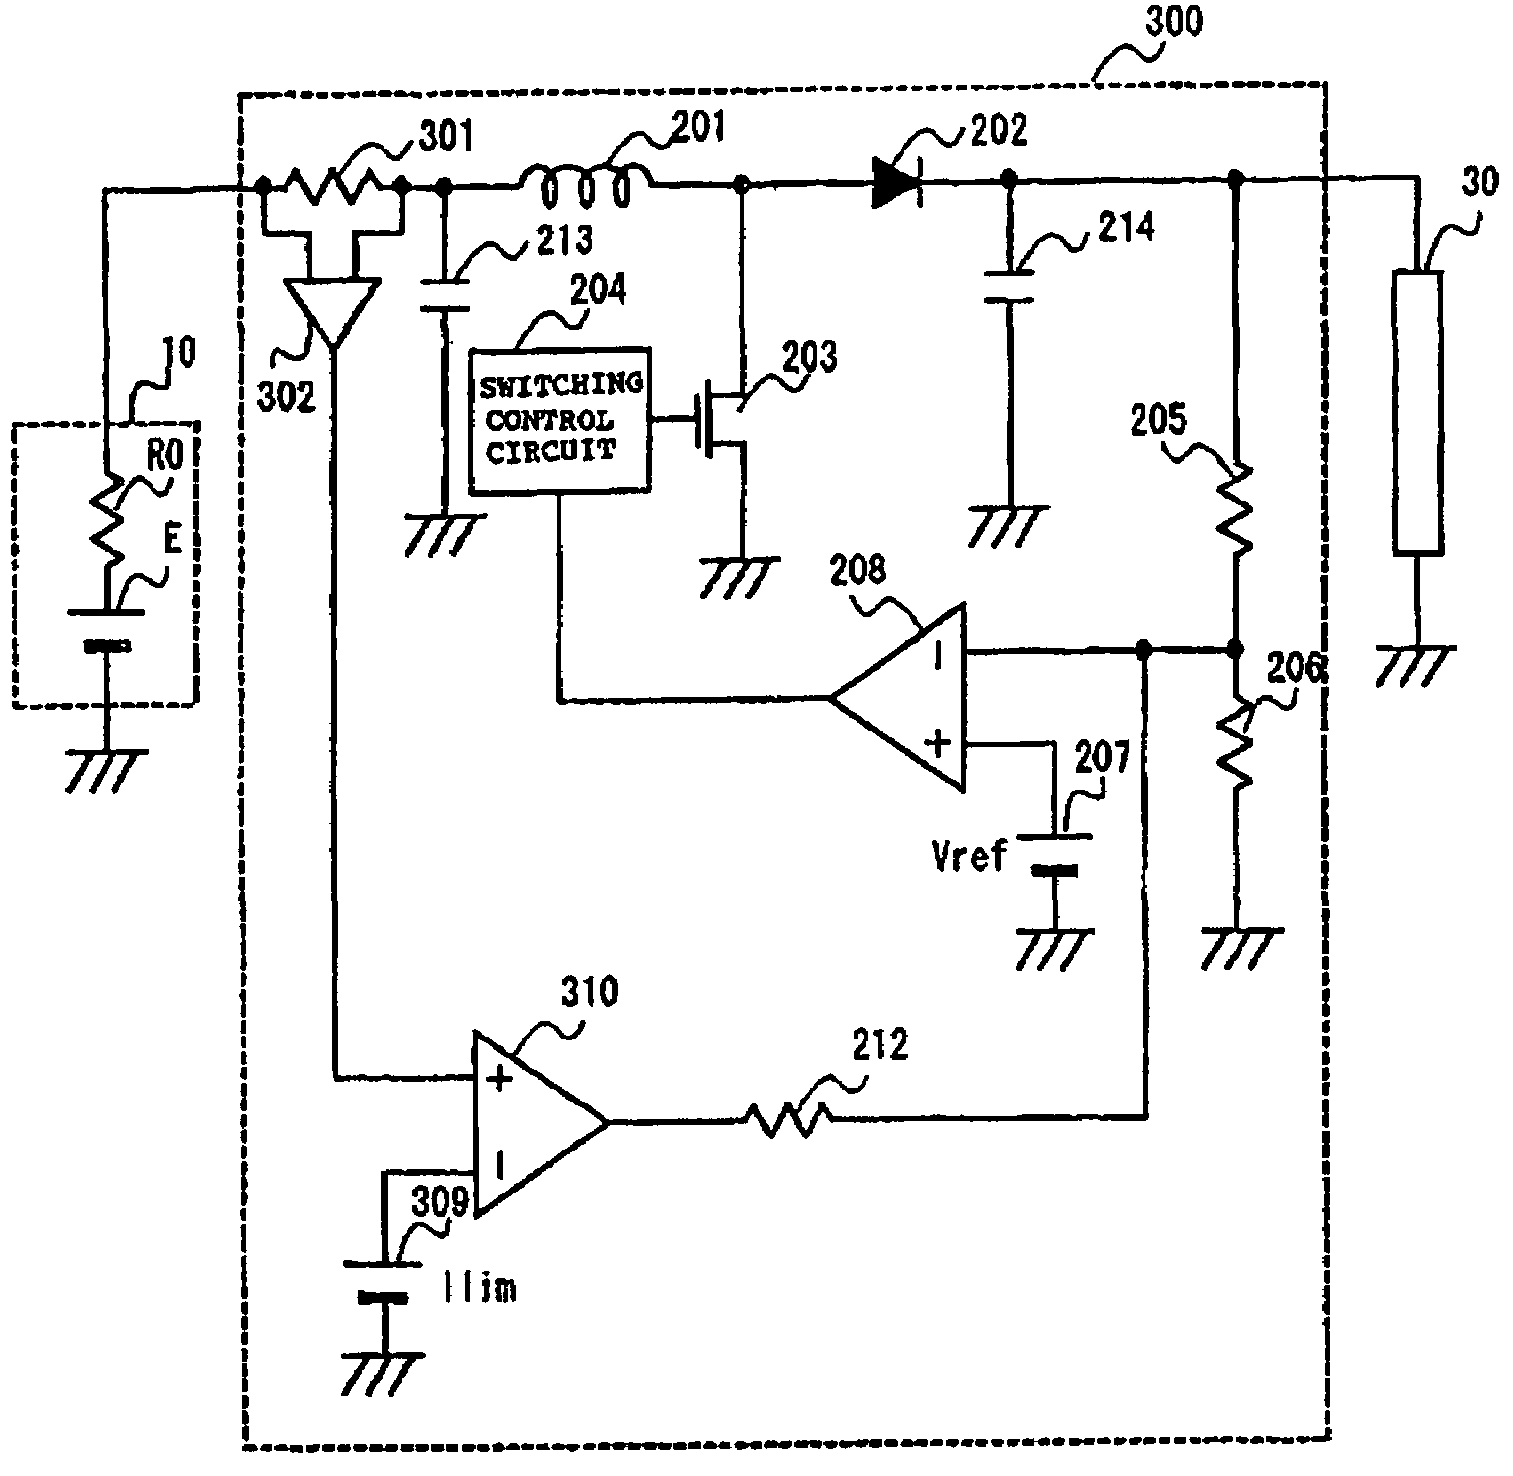 Output regulating device for regulating output of electric power source depending on input therefrom